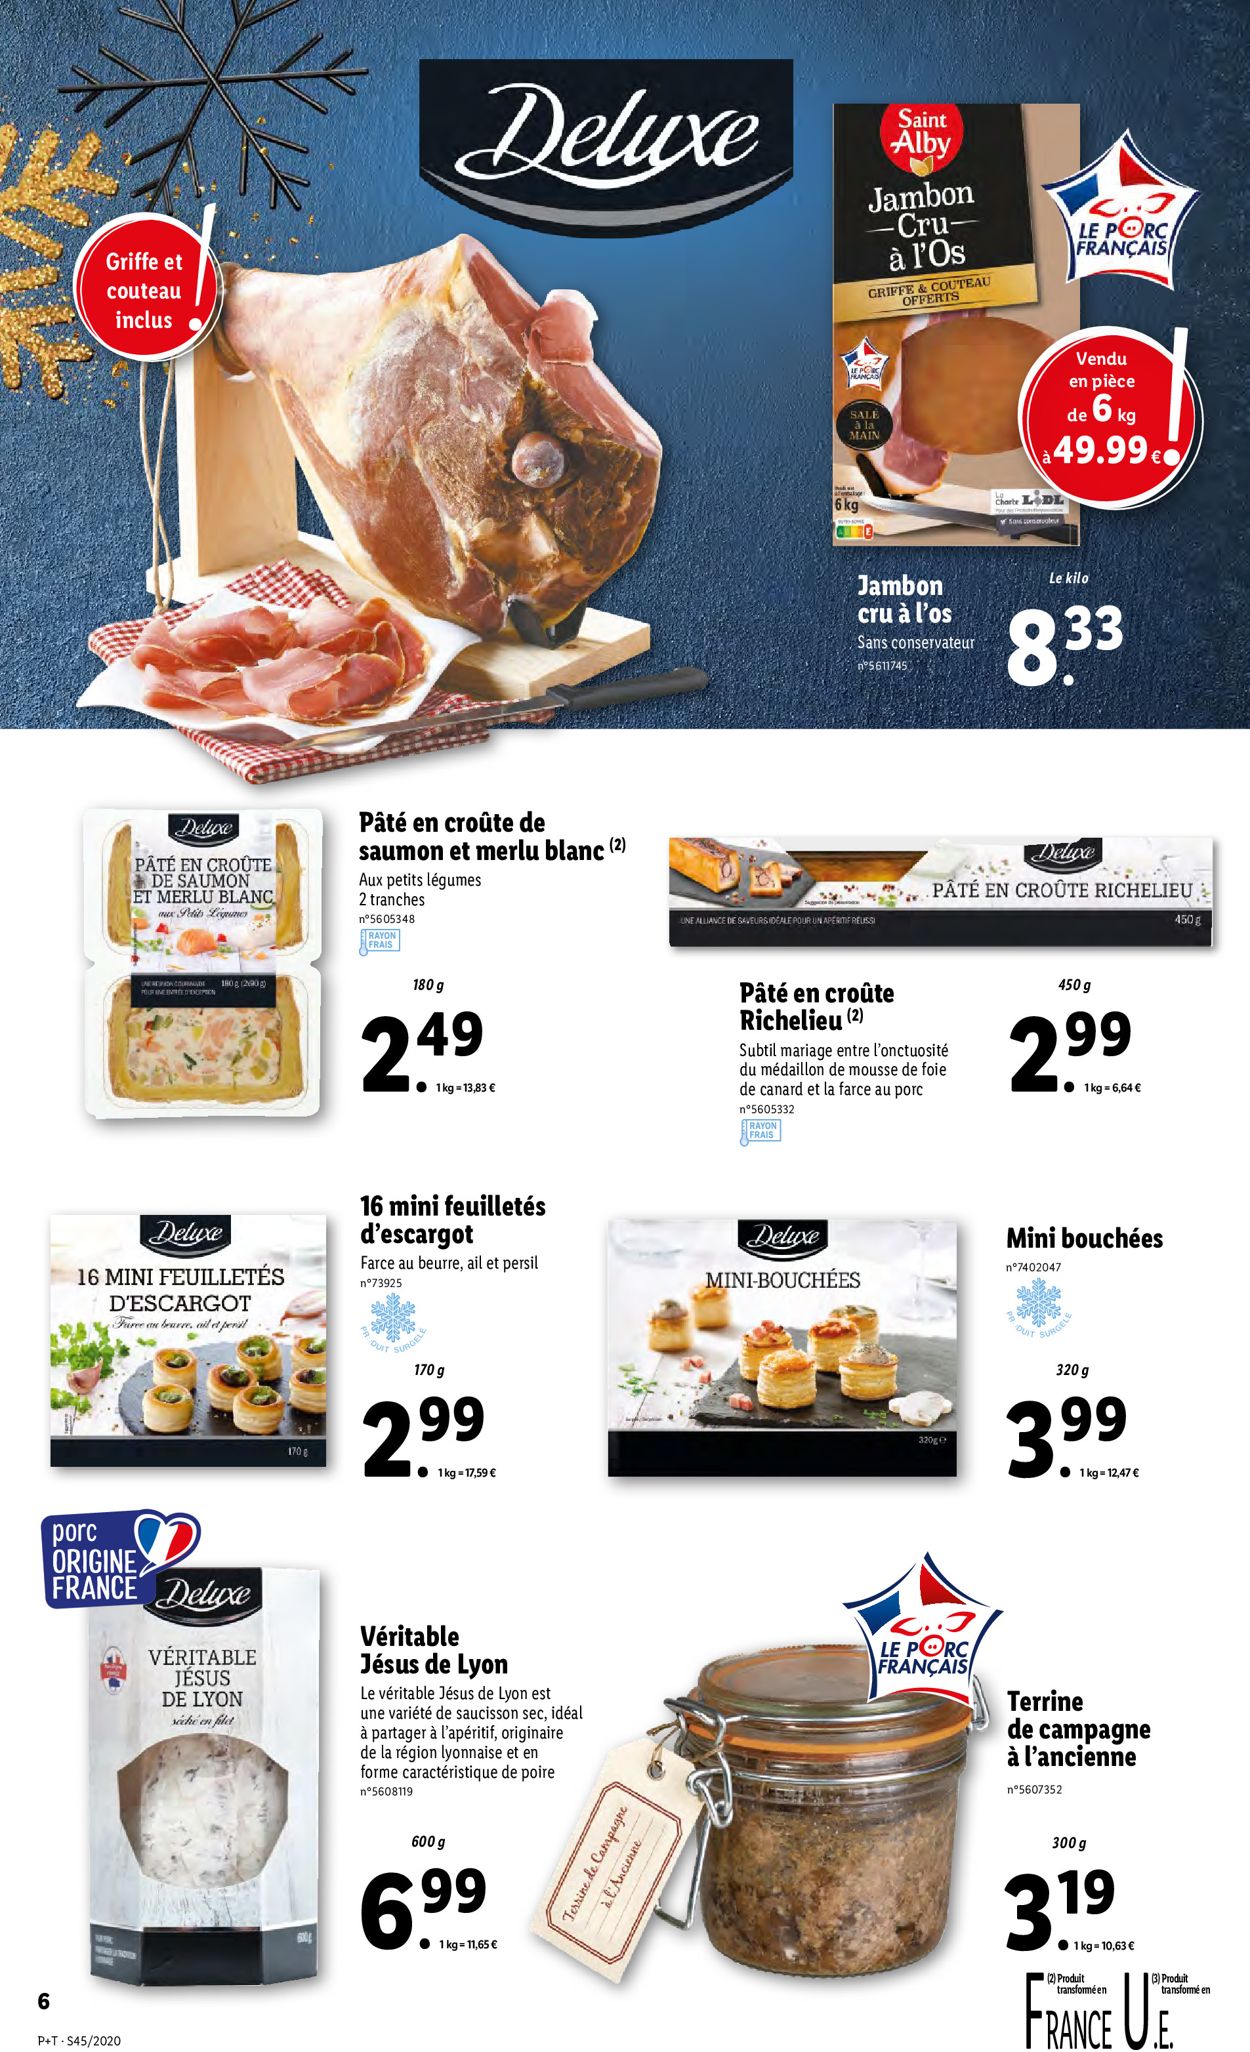 Lidl Catalogue - 04.11-10.11.2020 (Page 6)